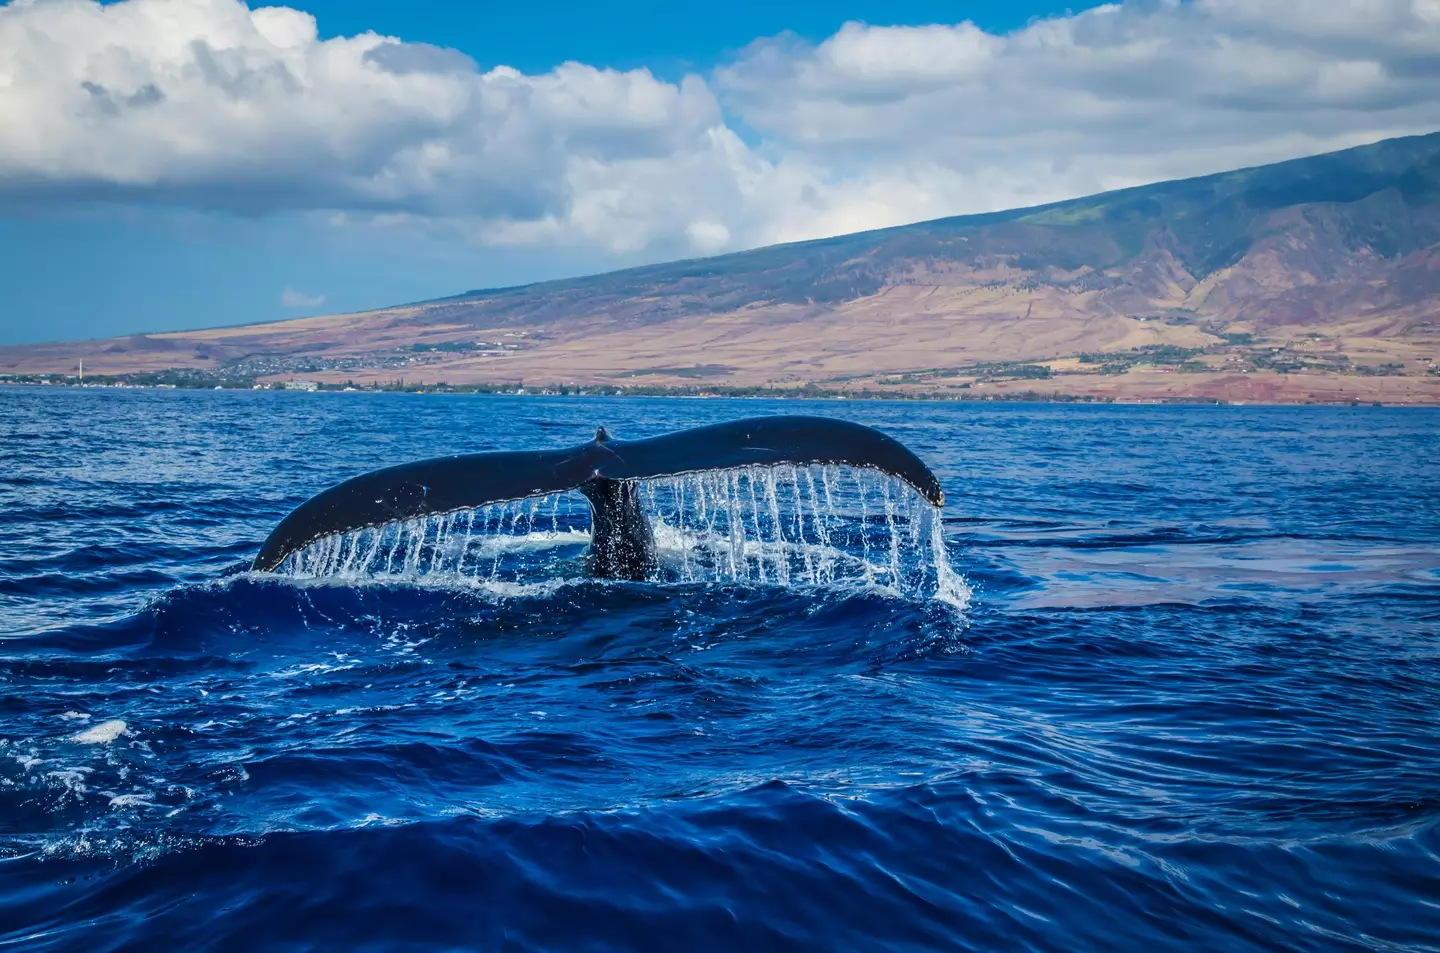 Sperm Whales have been known to dive down to below 3,000 feet, and have been spotted at oil rigs previously. (Pexels)